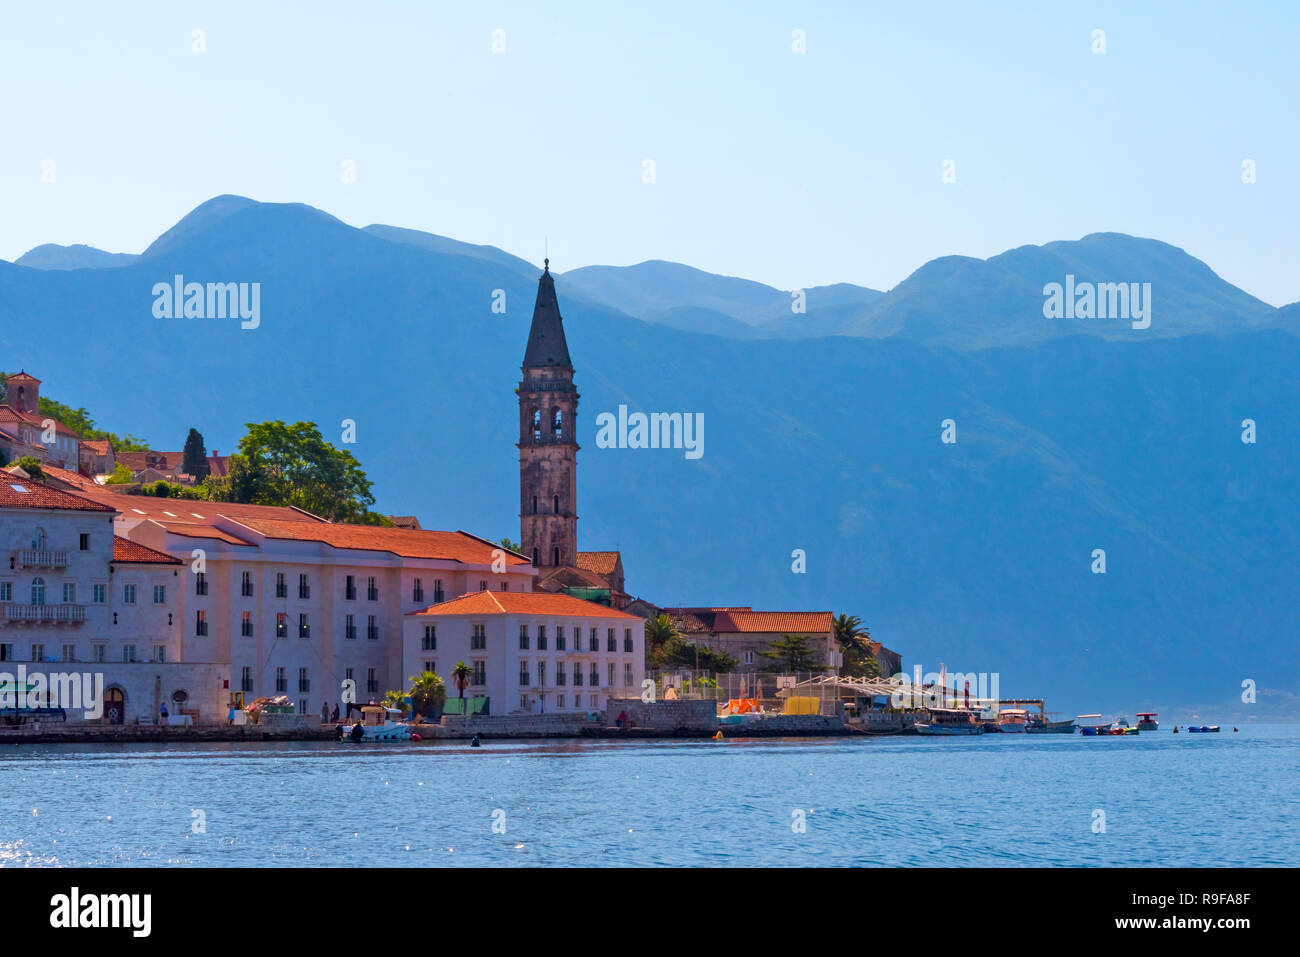 Church tower and houses on the Adriatic coast, Perast, Montenegro Stock Photo